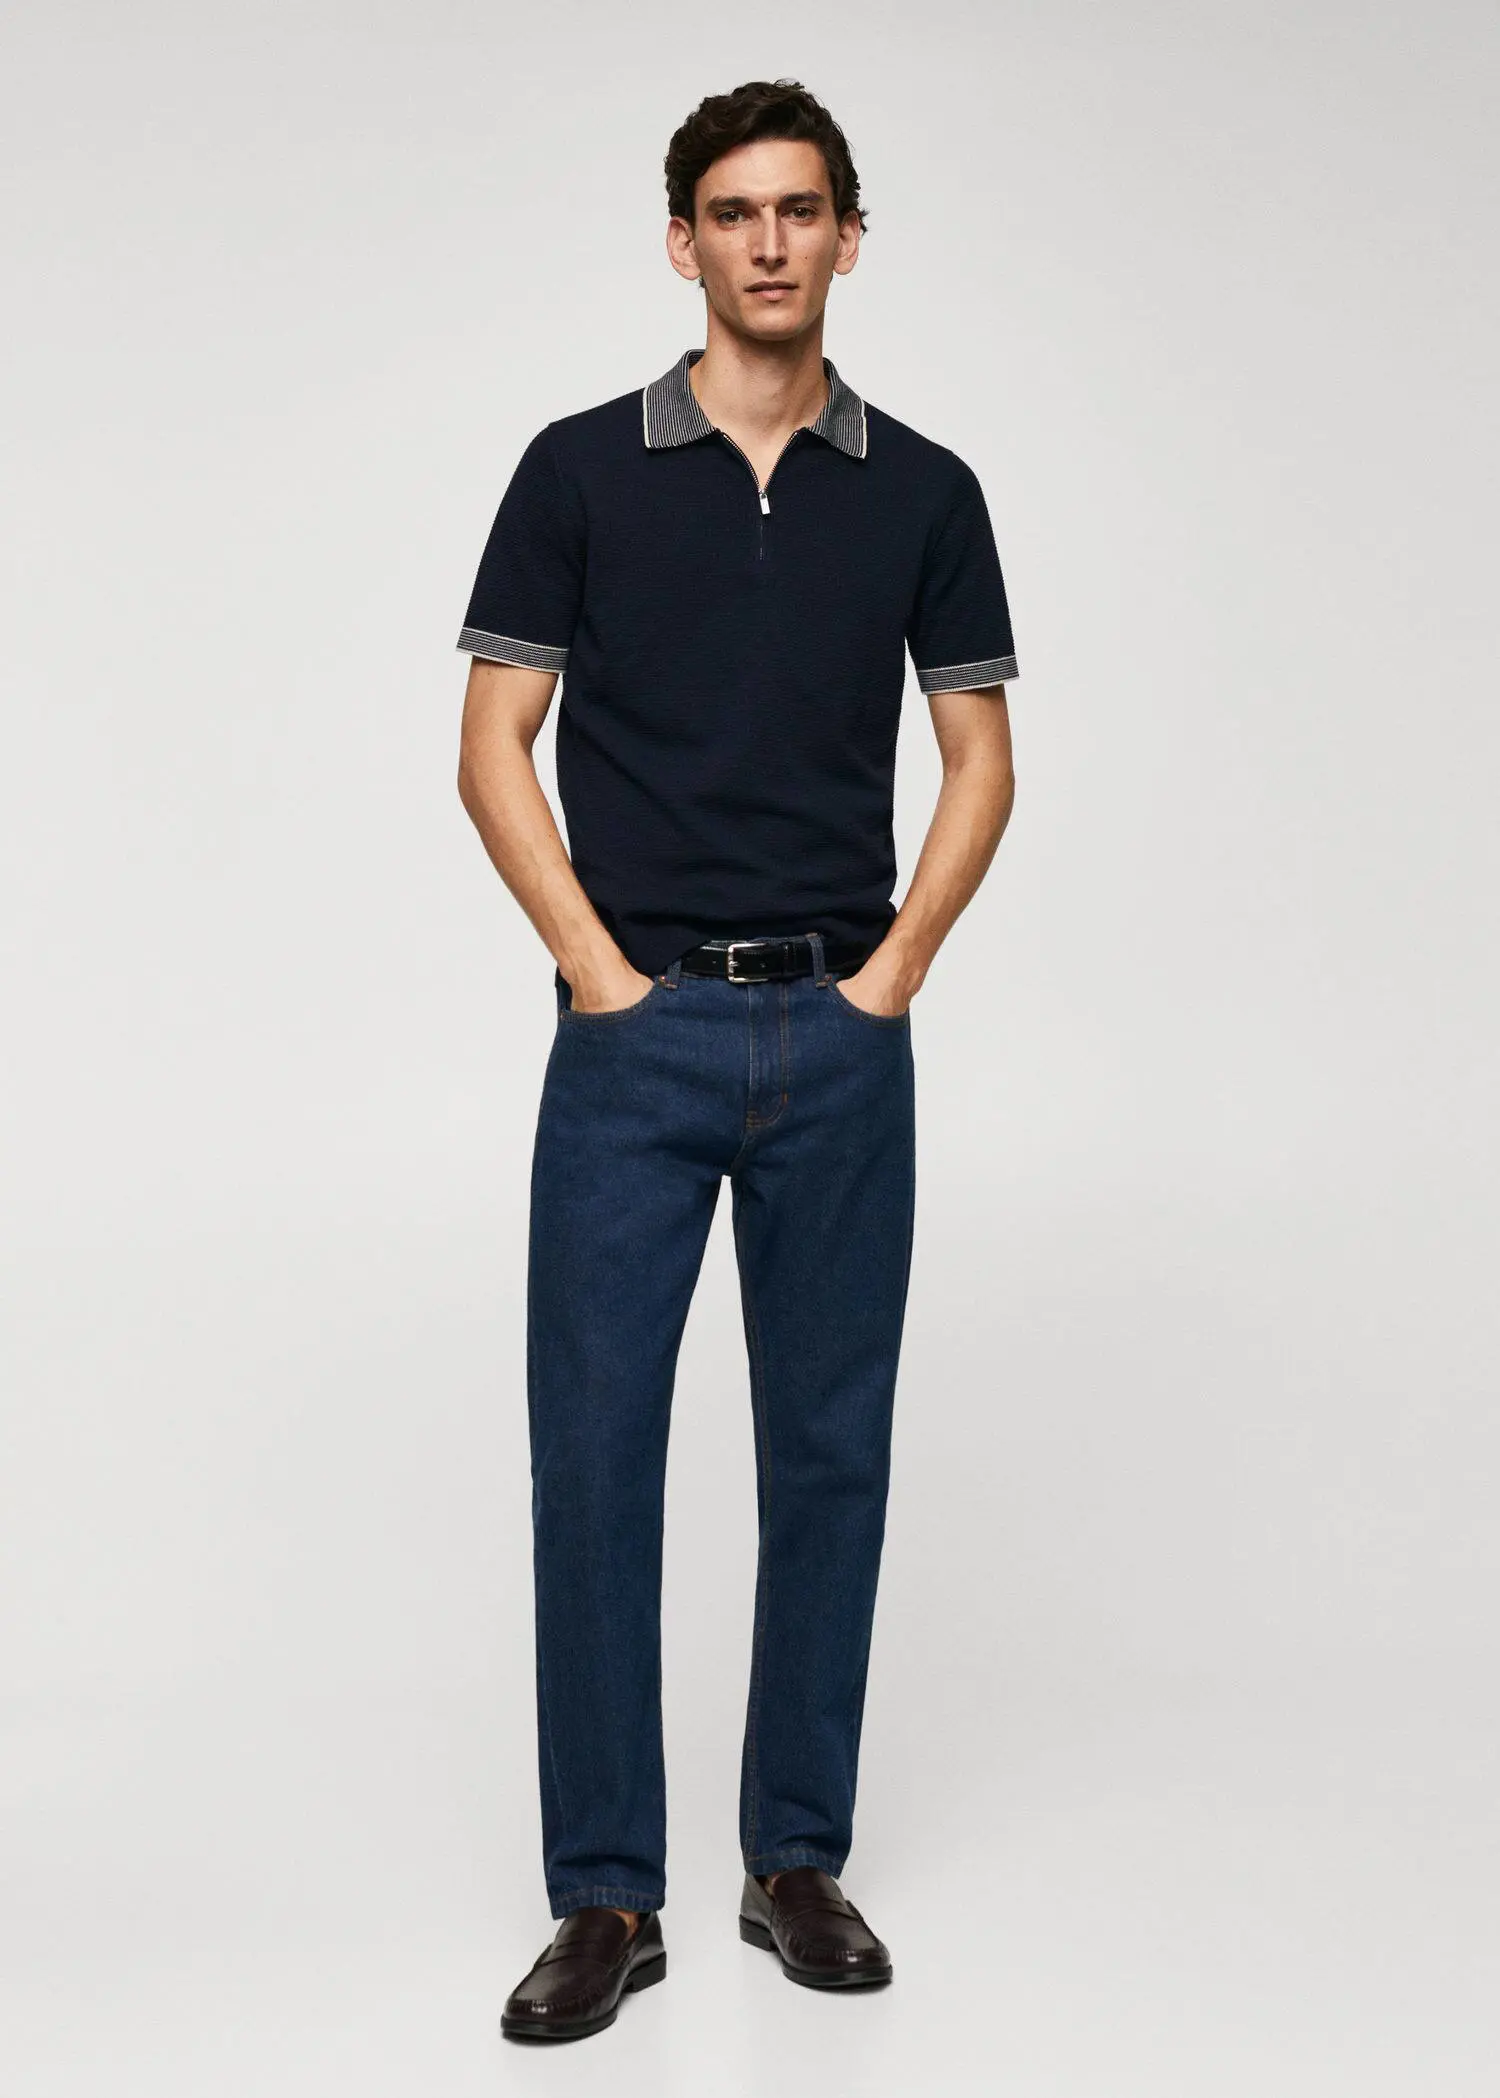 Mango Fine-knit polo shirt with zip. a man in a black polo shirt and blue jeans. 